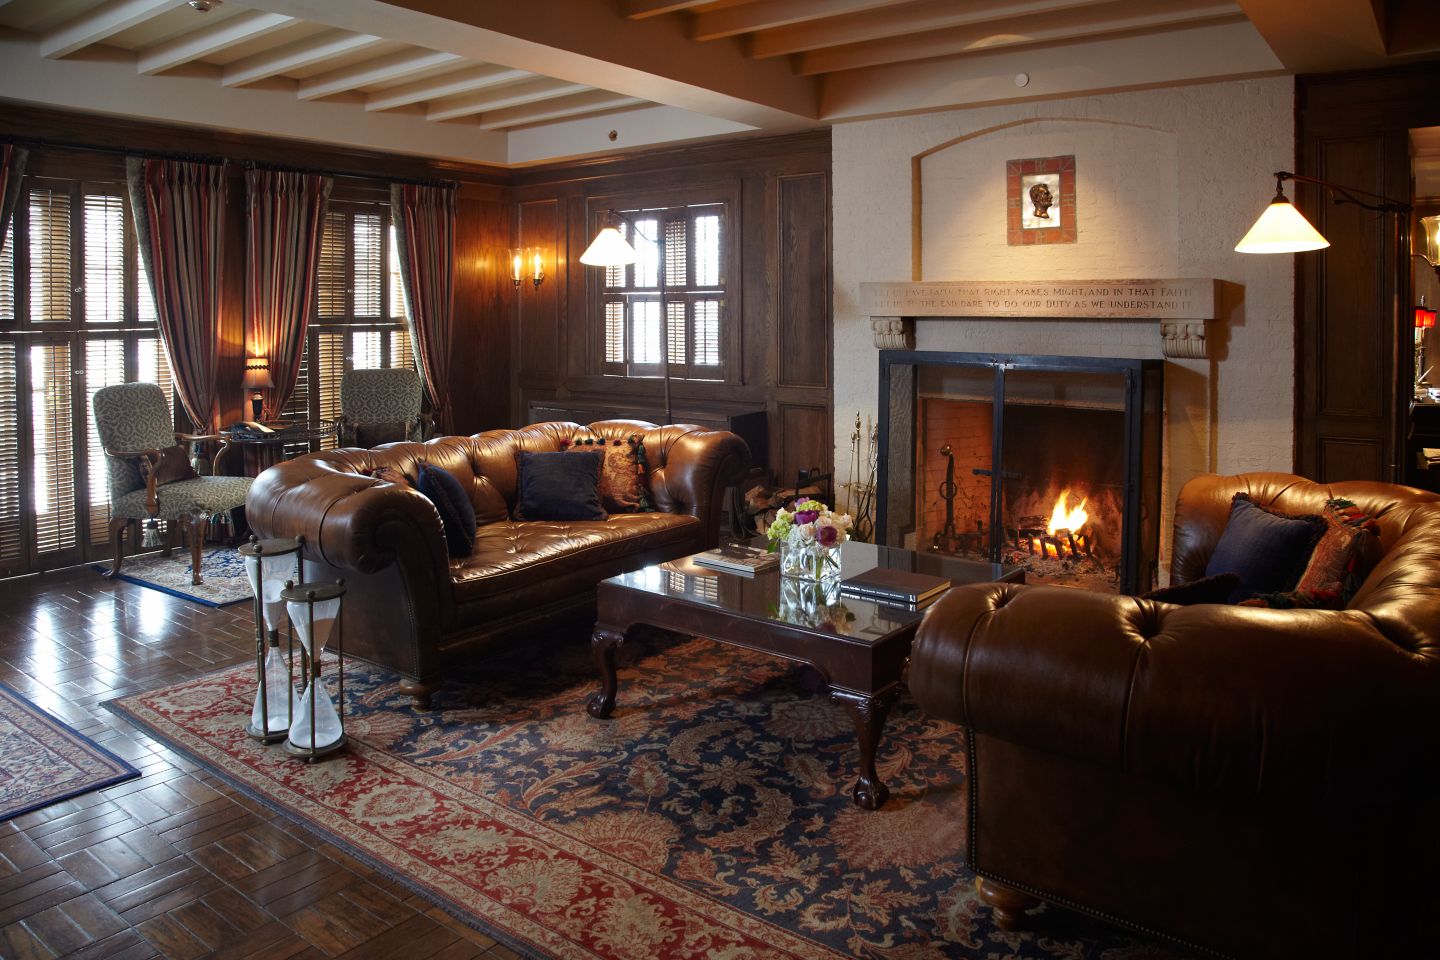 Interior of the American Club facing the fireplace which is surrounded by leather couches